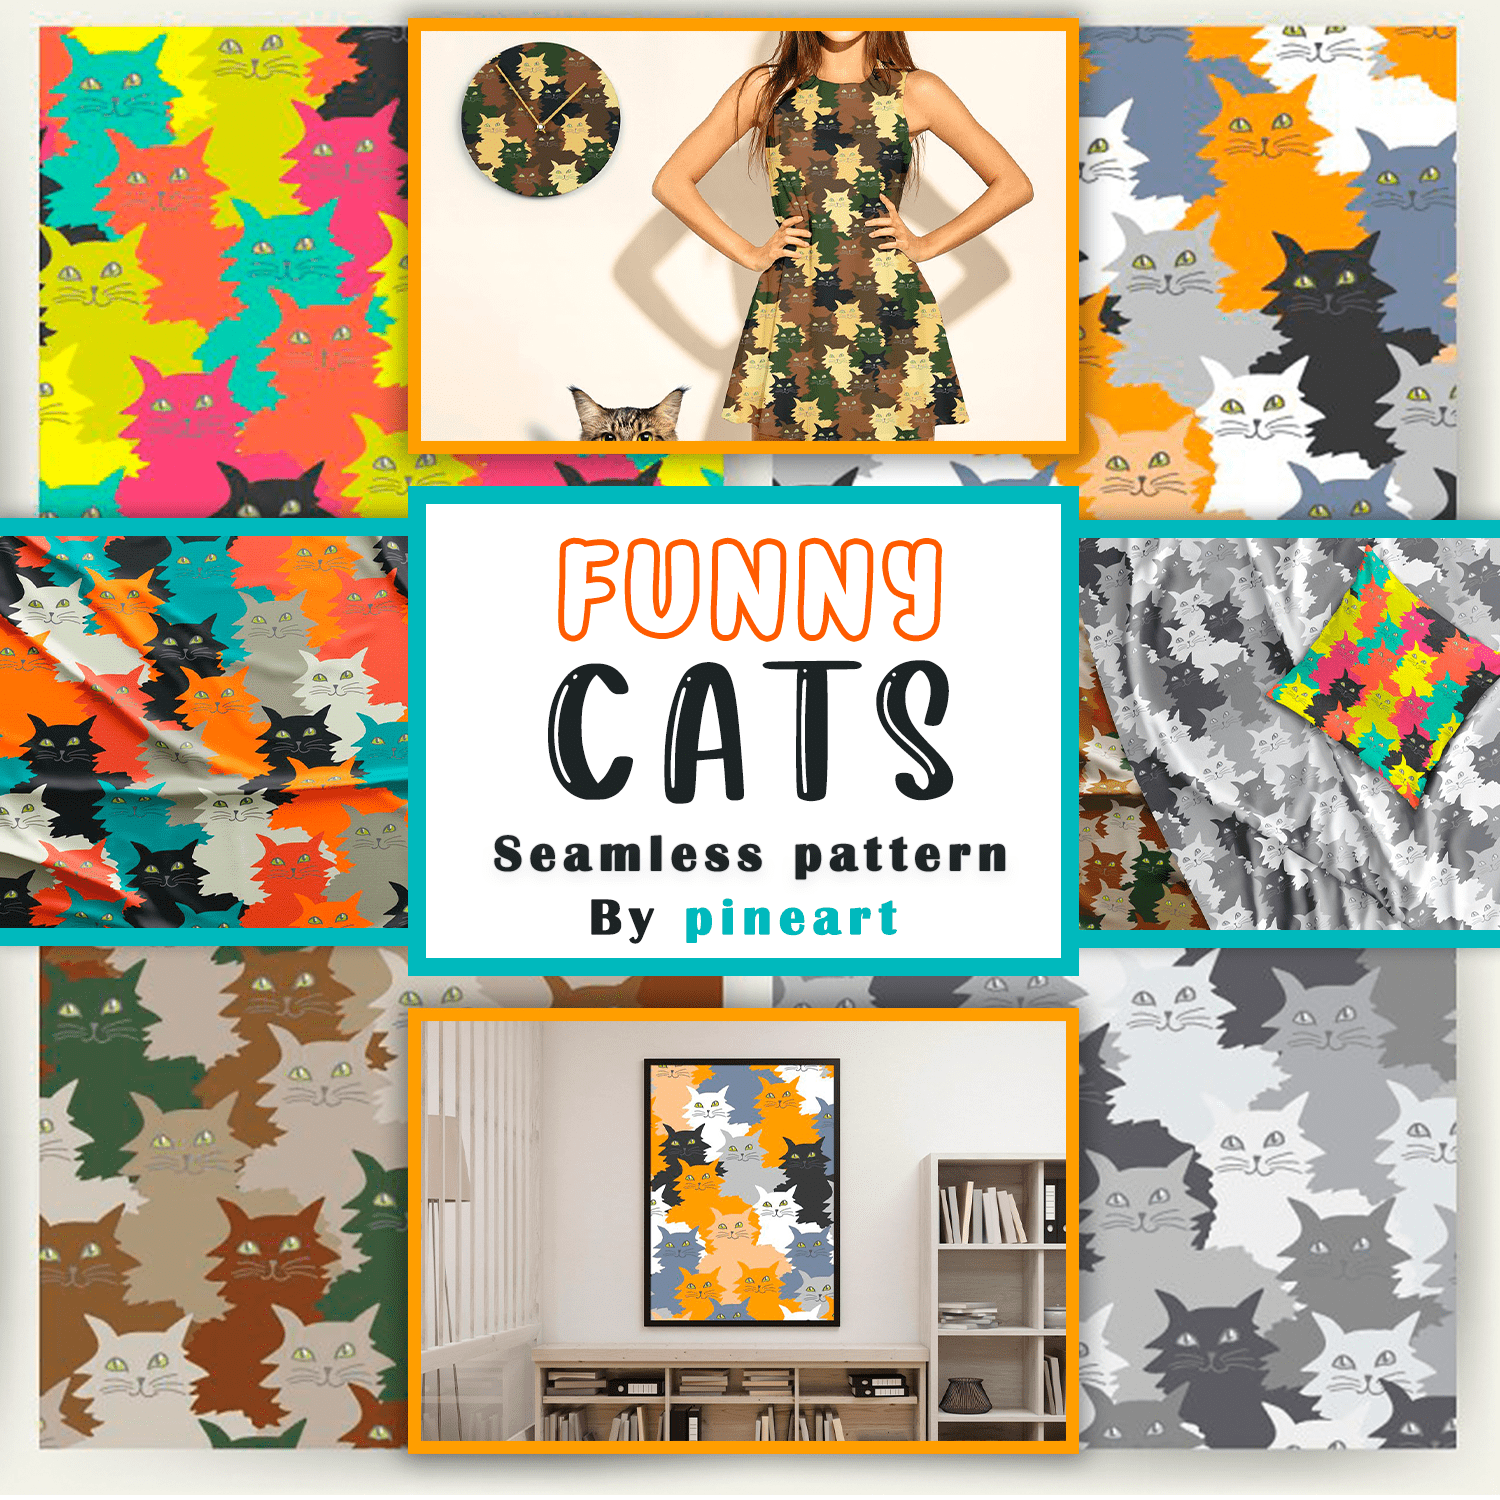 Seamless pattern with cats cover.